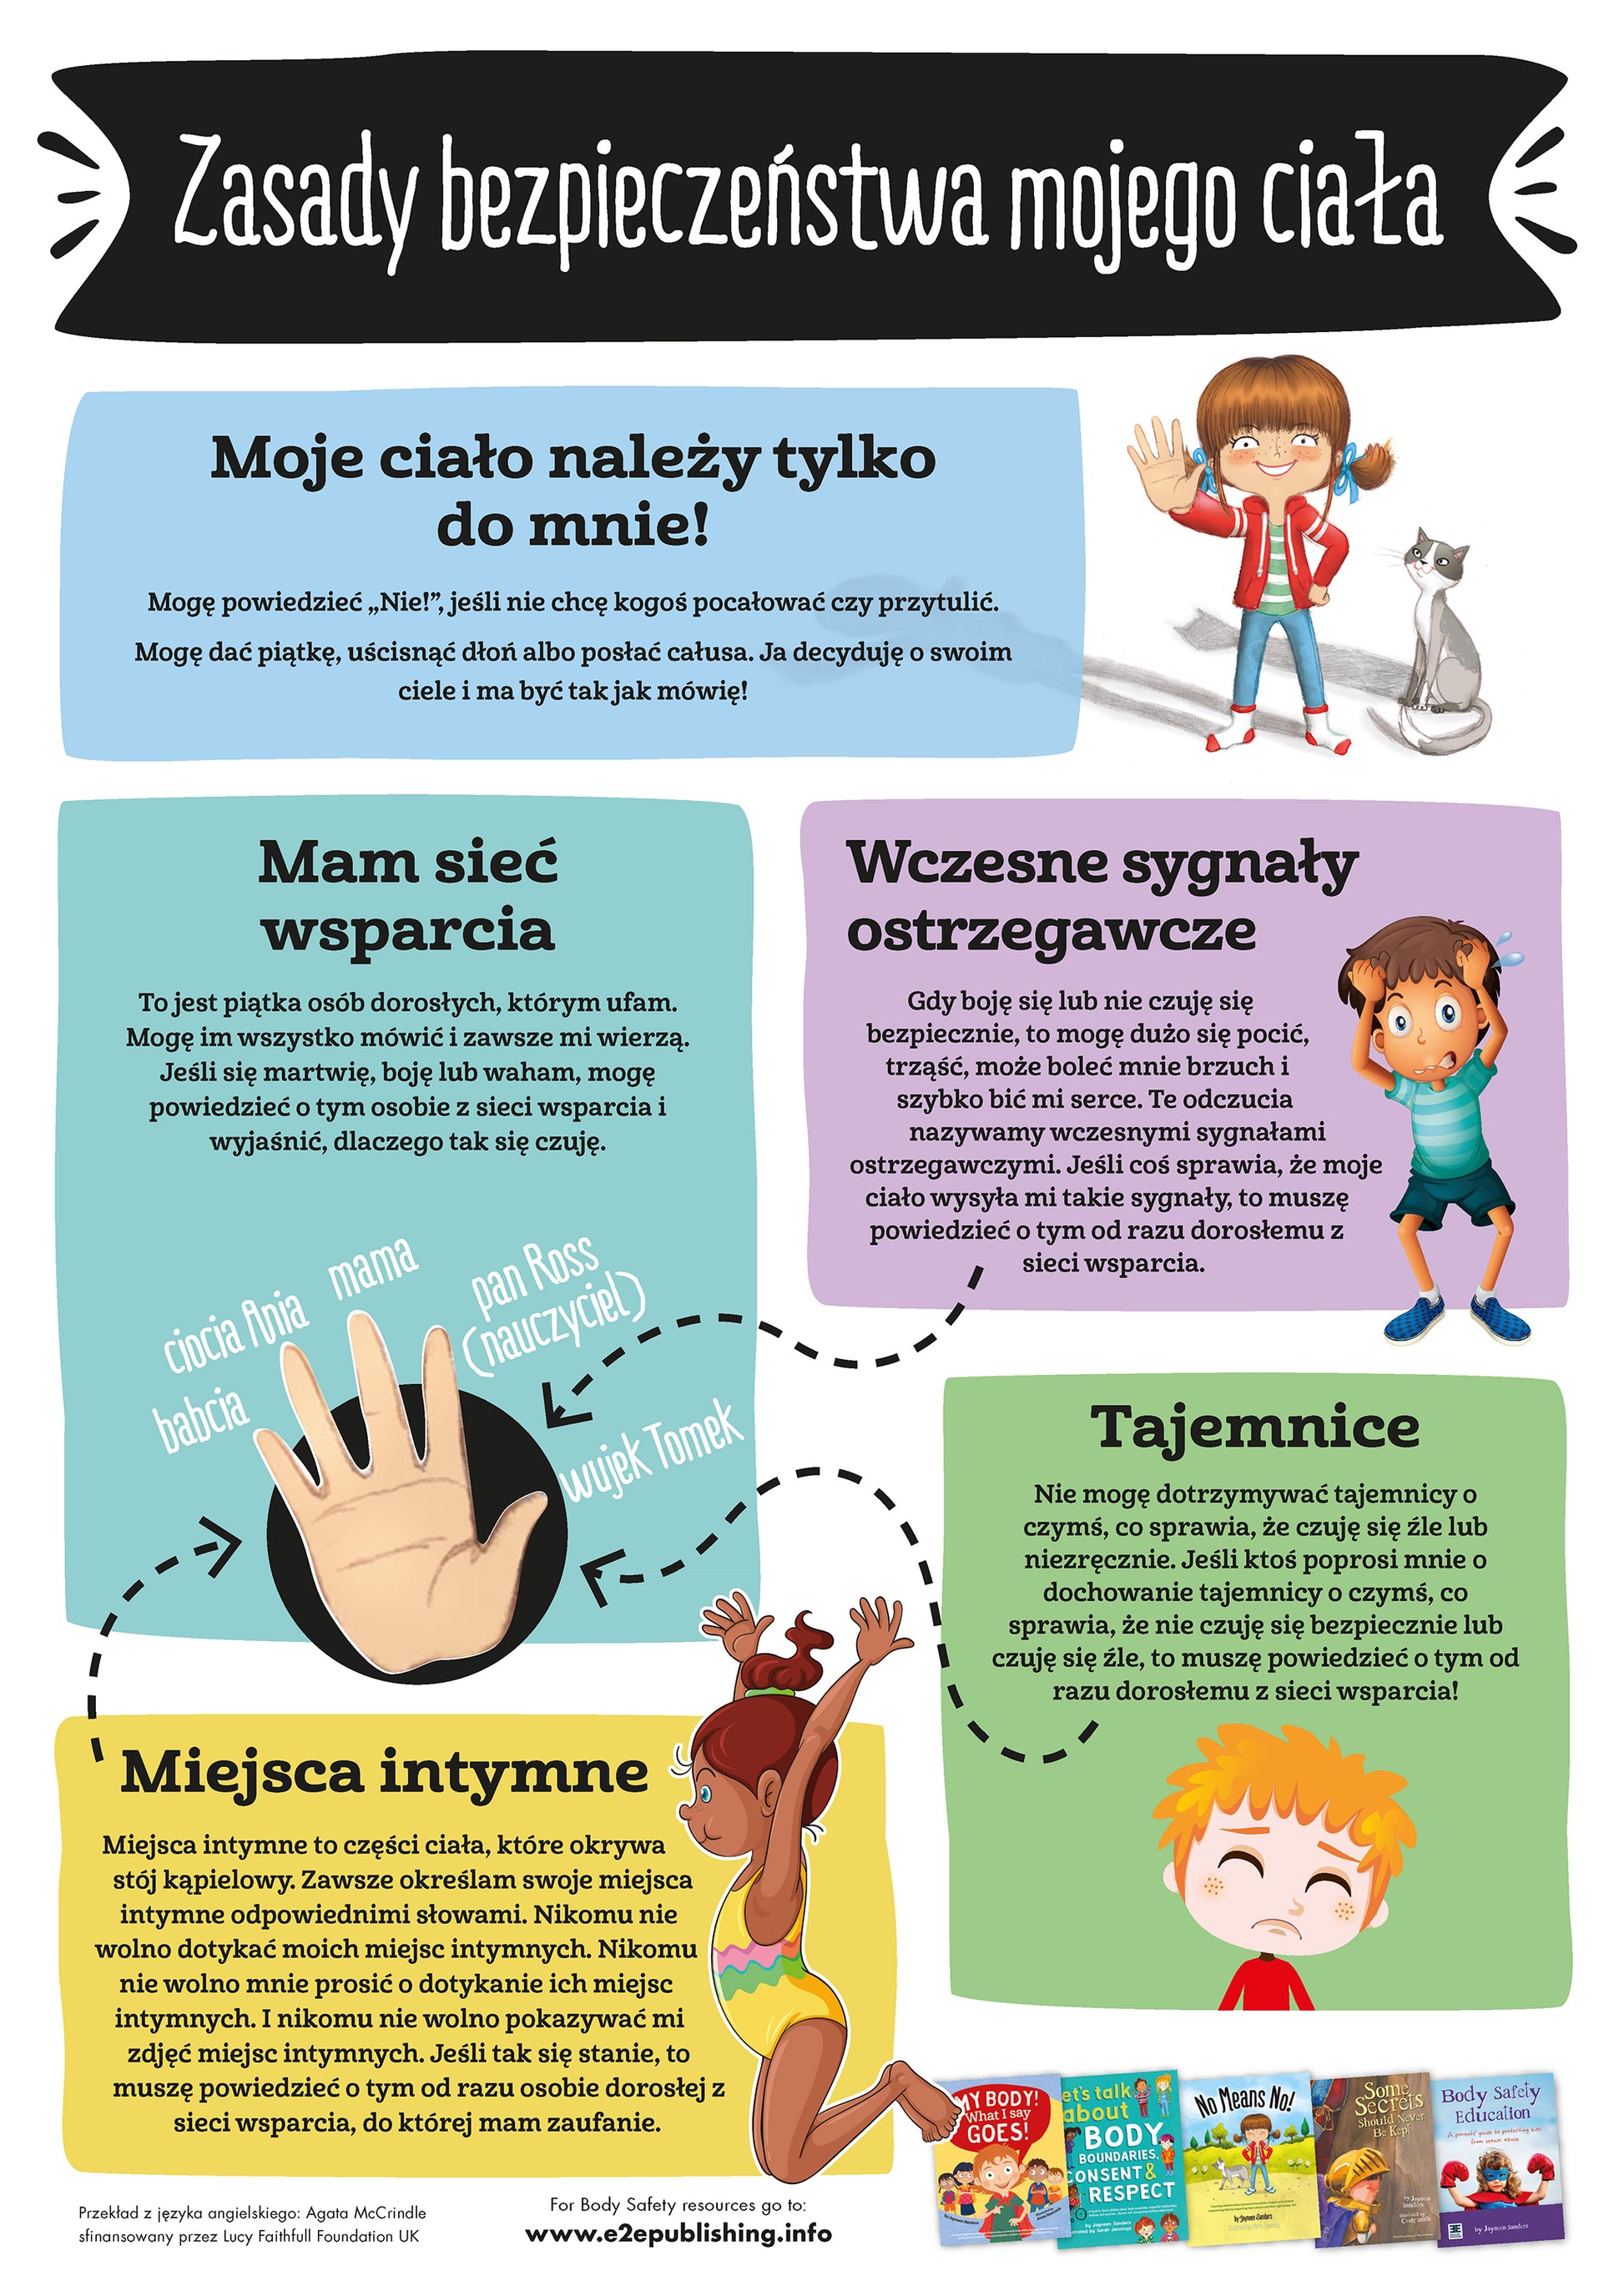 Body Safety Rules poster for children, written in Polish.